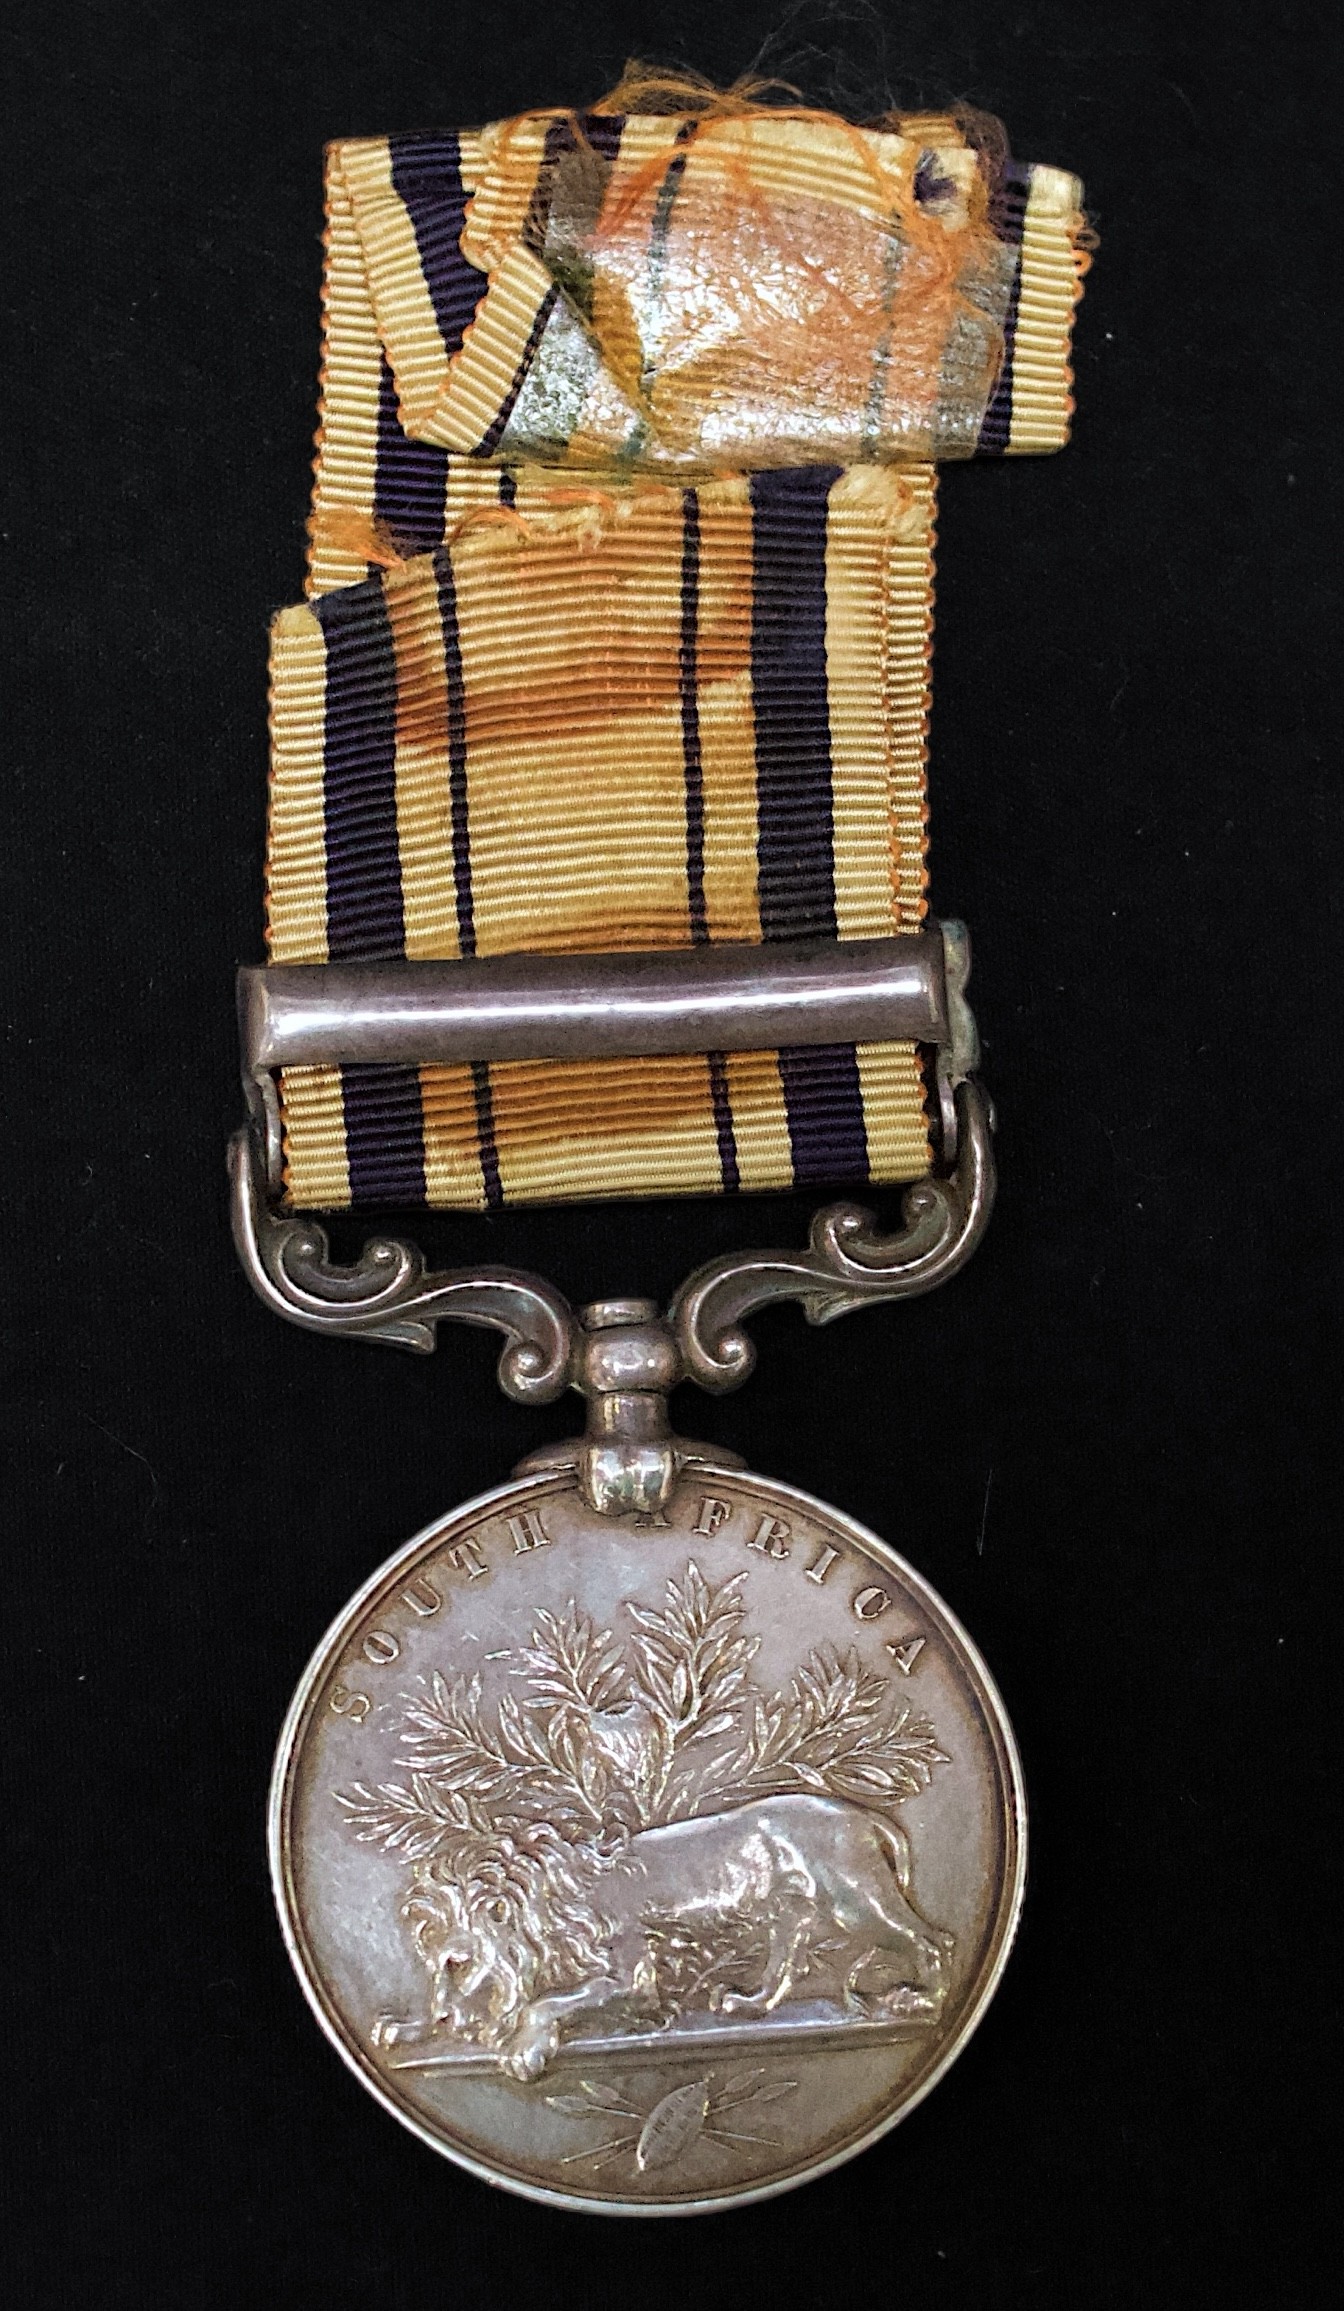 A Queen Victoria South Africa Medal (Zulu & Basuto War) with 1879 Clasp, to 'LIEUT: D.P. ROBERTSON - Image 2 of 4